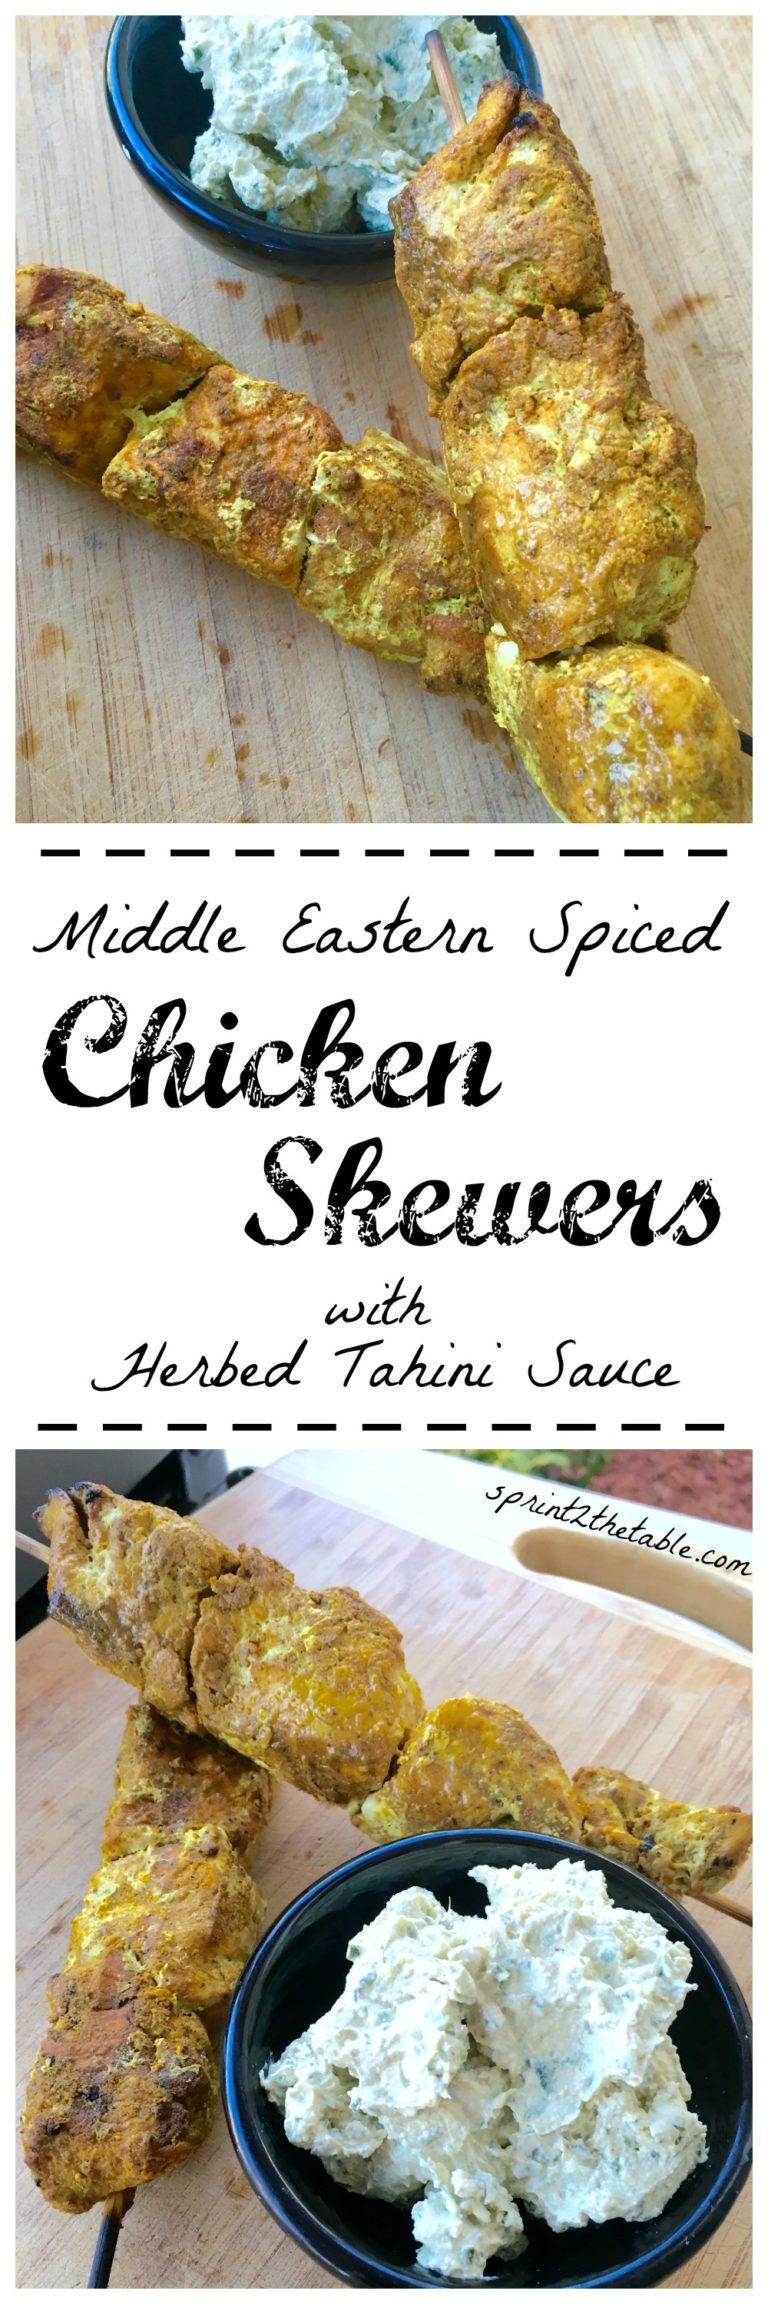 Middle Eastern Spiced Chicken Skewers with Herbed Tahini Sauce